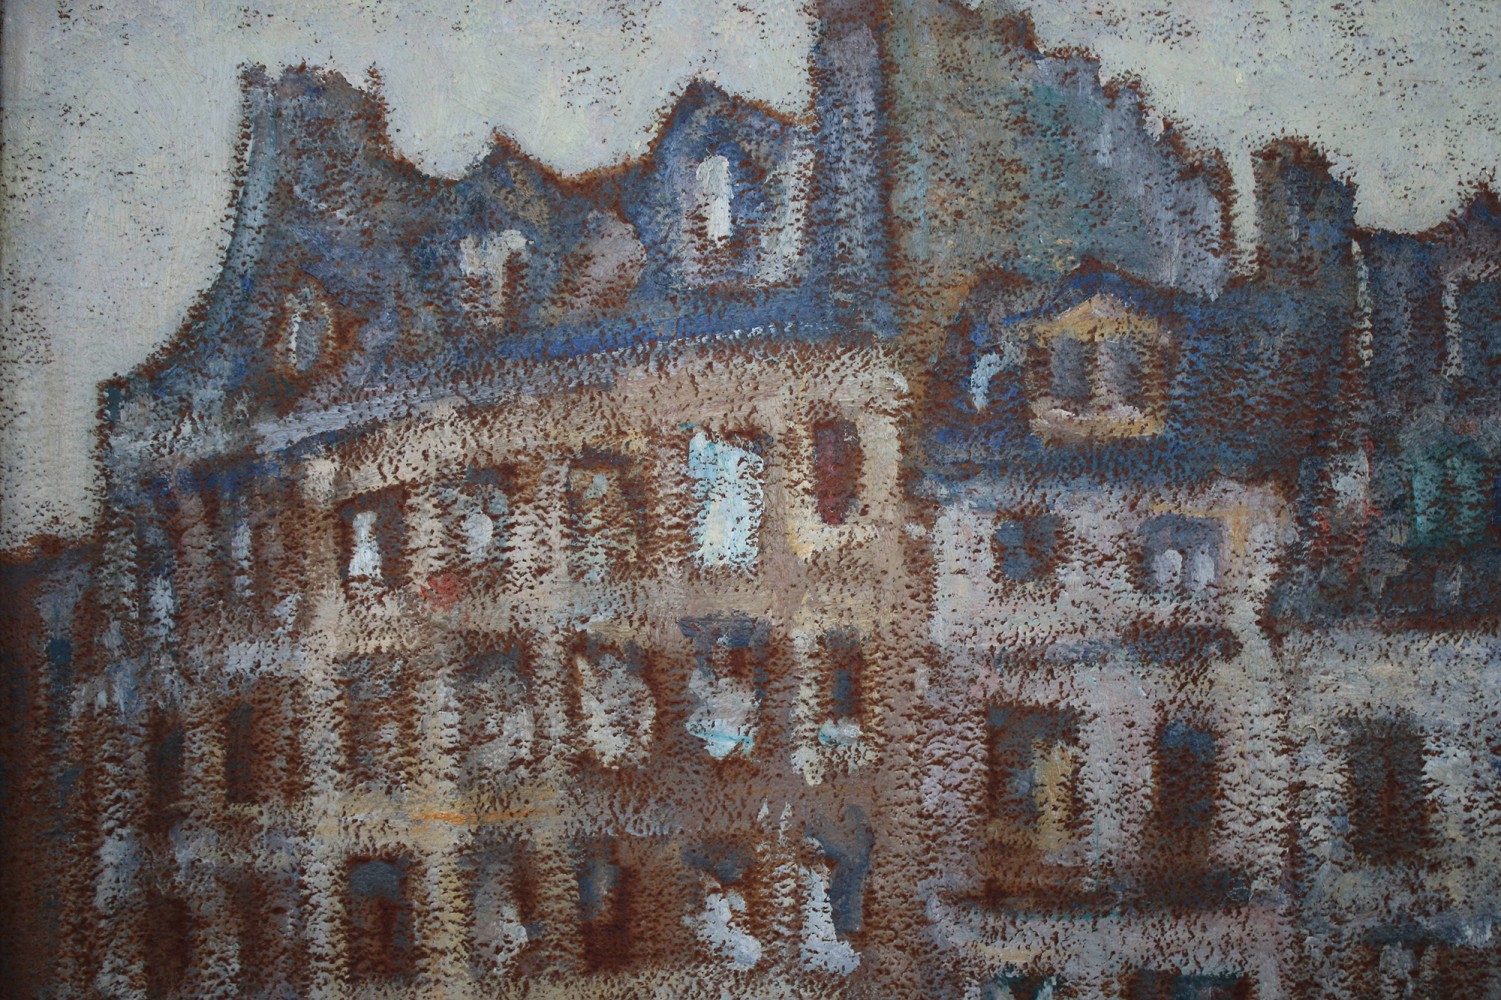 Landscape Oil on Board Painting: Latin Quarter, Paris painted by Grant Wood in 1920